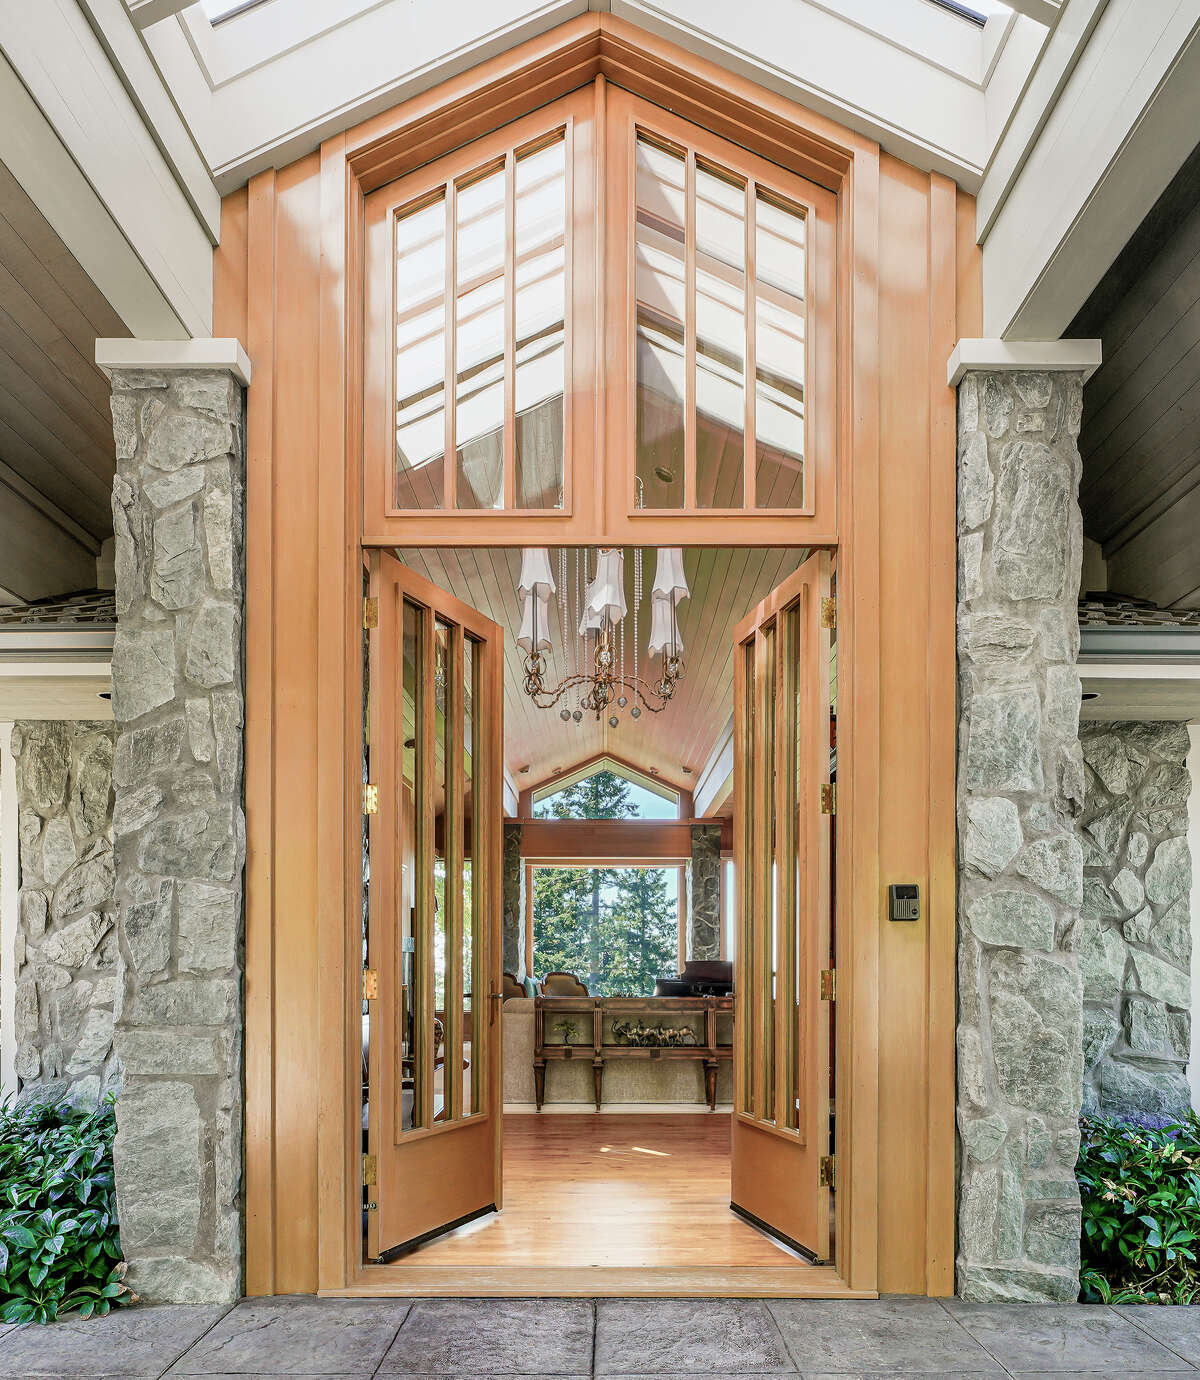 The stunning hand-crafted wood and glass entry is classic Ralph Anderson.